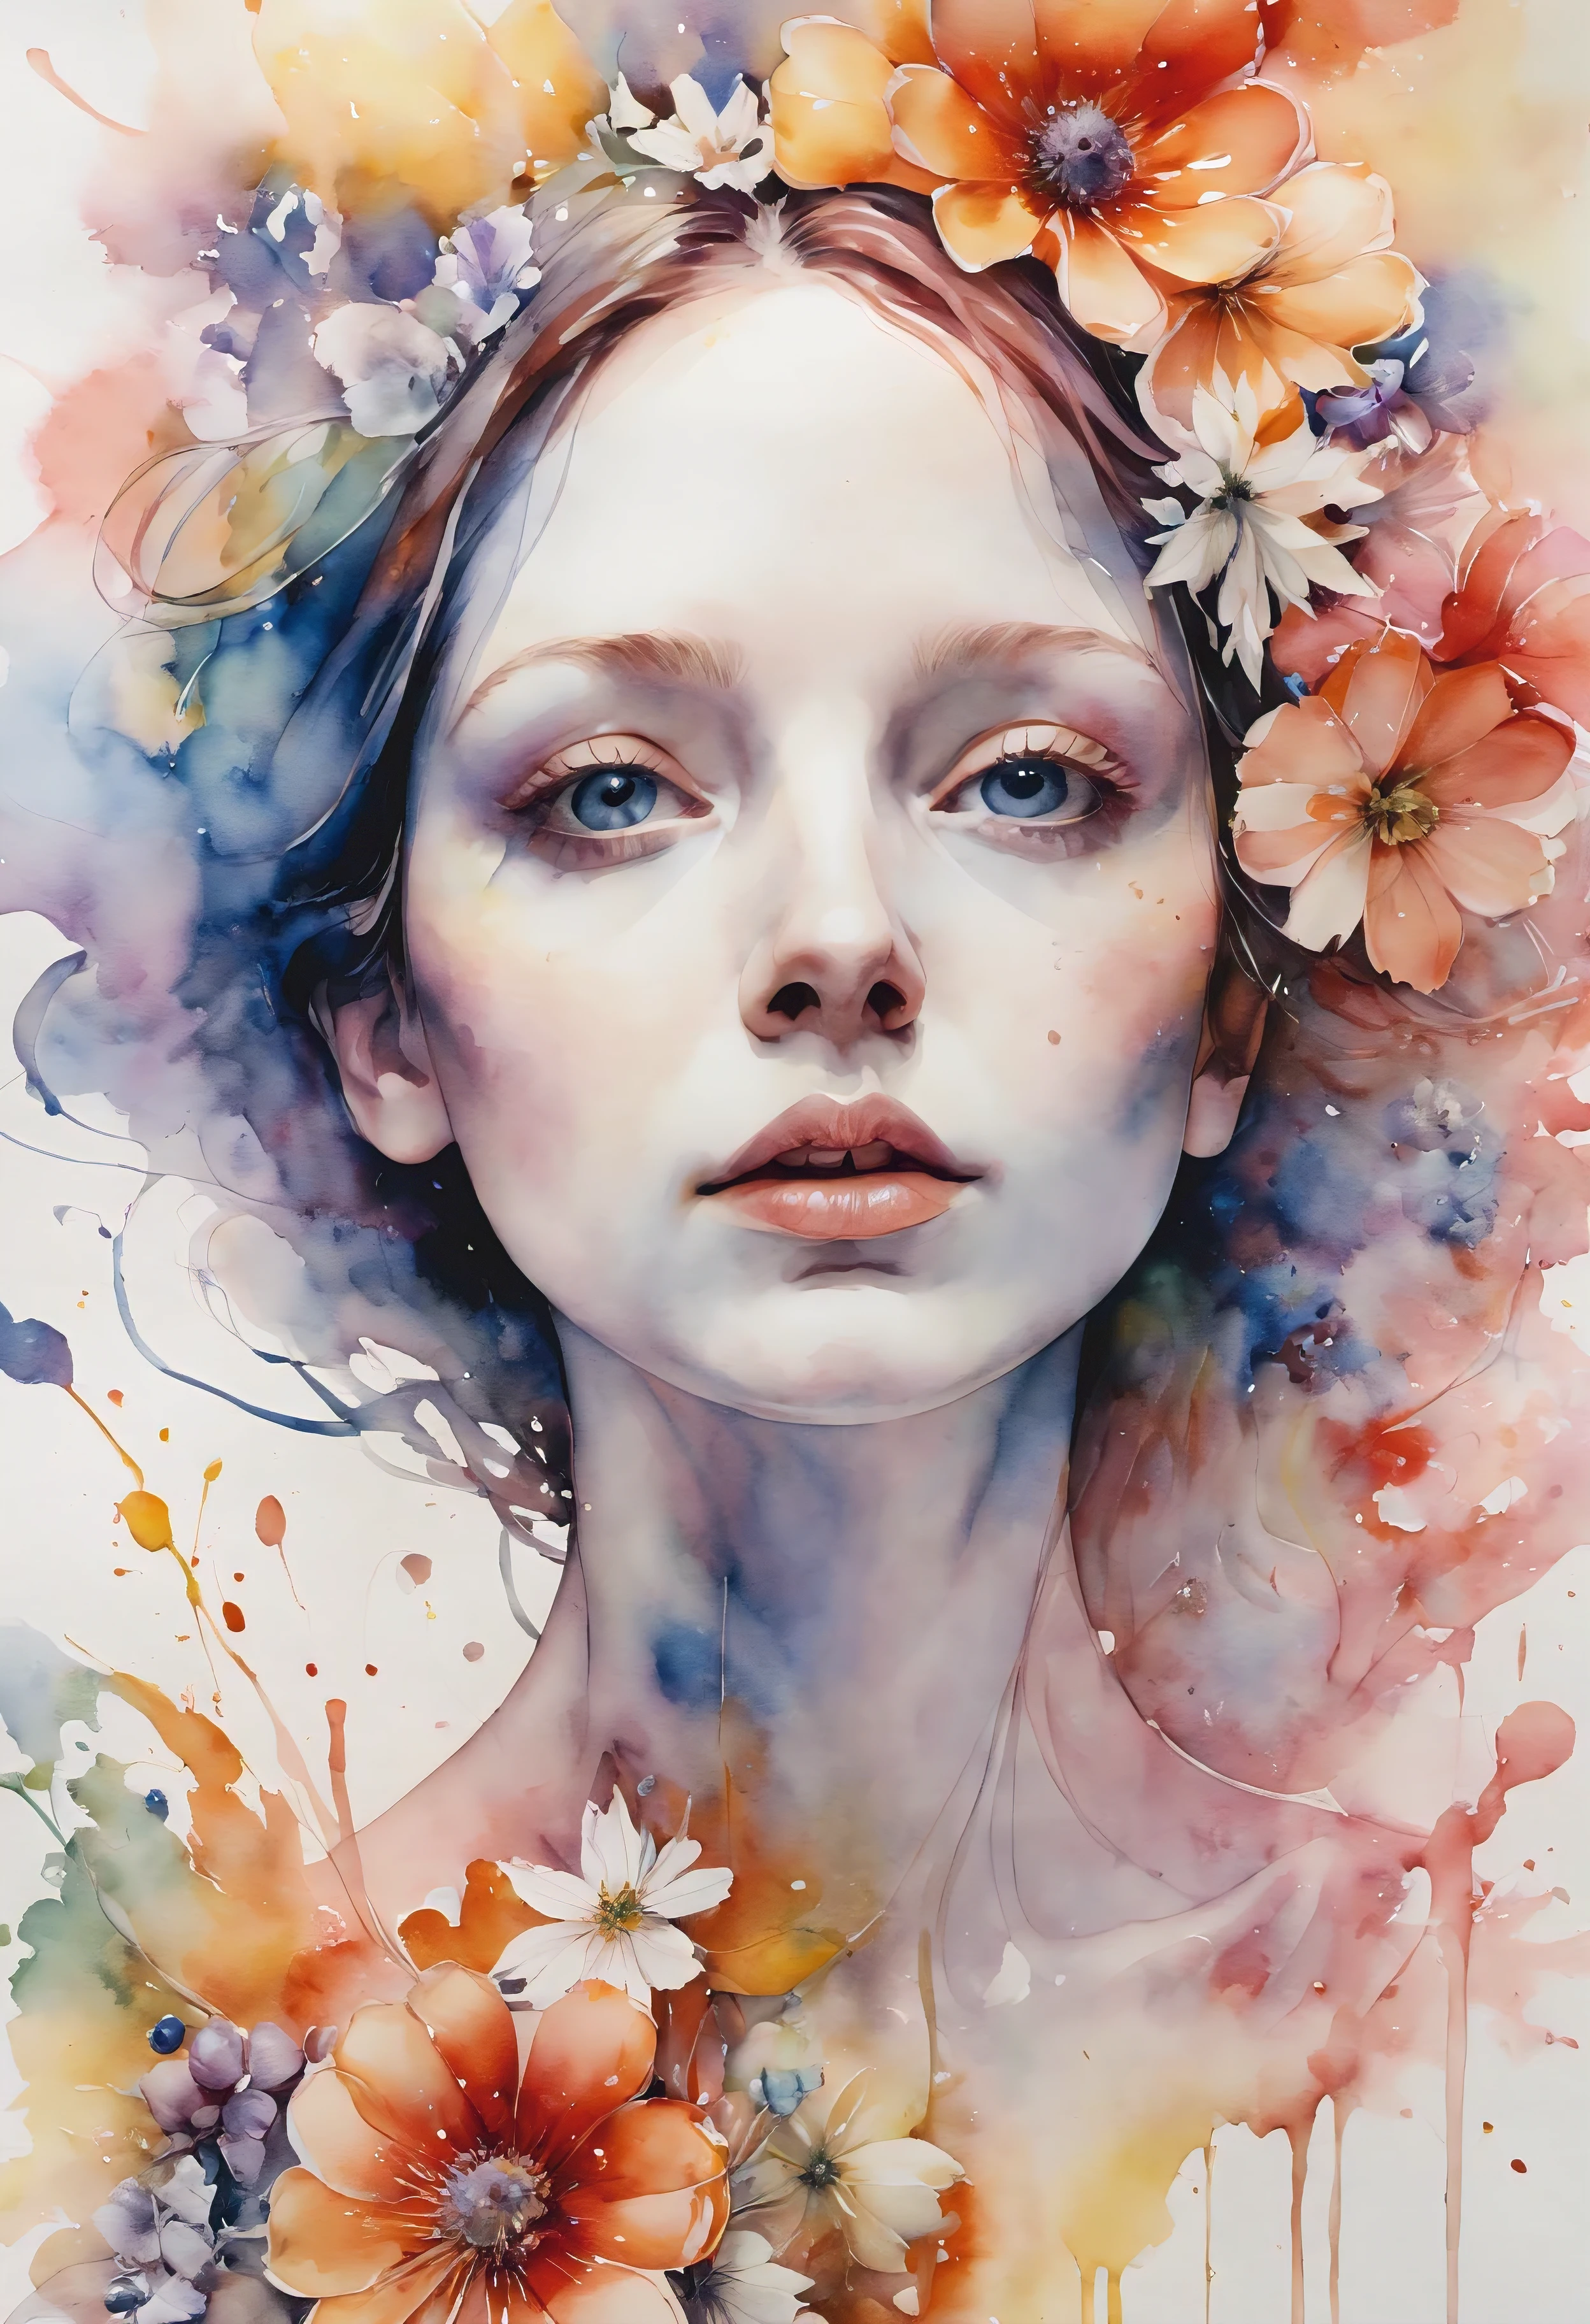 (((watercolor:1.5))), ((watercolor painting):1.4), ((a painting of woman by Agnes Cecile):1.3), ((Flowers):1.4), ((luminious design):1.3), ((autumn lights):1.1), Gouache with intricate details, pastel color, ink drips, Detailed brushstrokes have been enhanced, Careful brushwork creates an atmosphere, Utilize delicate yet powerful brushstroke techniques, Create an enchanting atmosphere. highly detailed gouache, ((Unparalleled sharpness and clarity):1.1), ((Radiosity rendered in stunning 32K resolution):1.3), All captured with sharp focus.